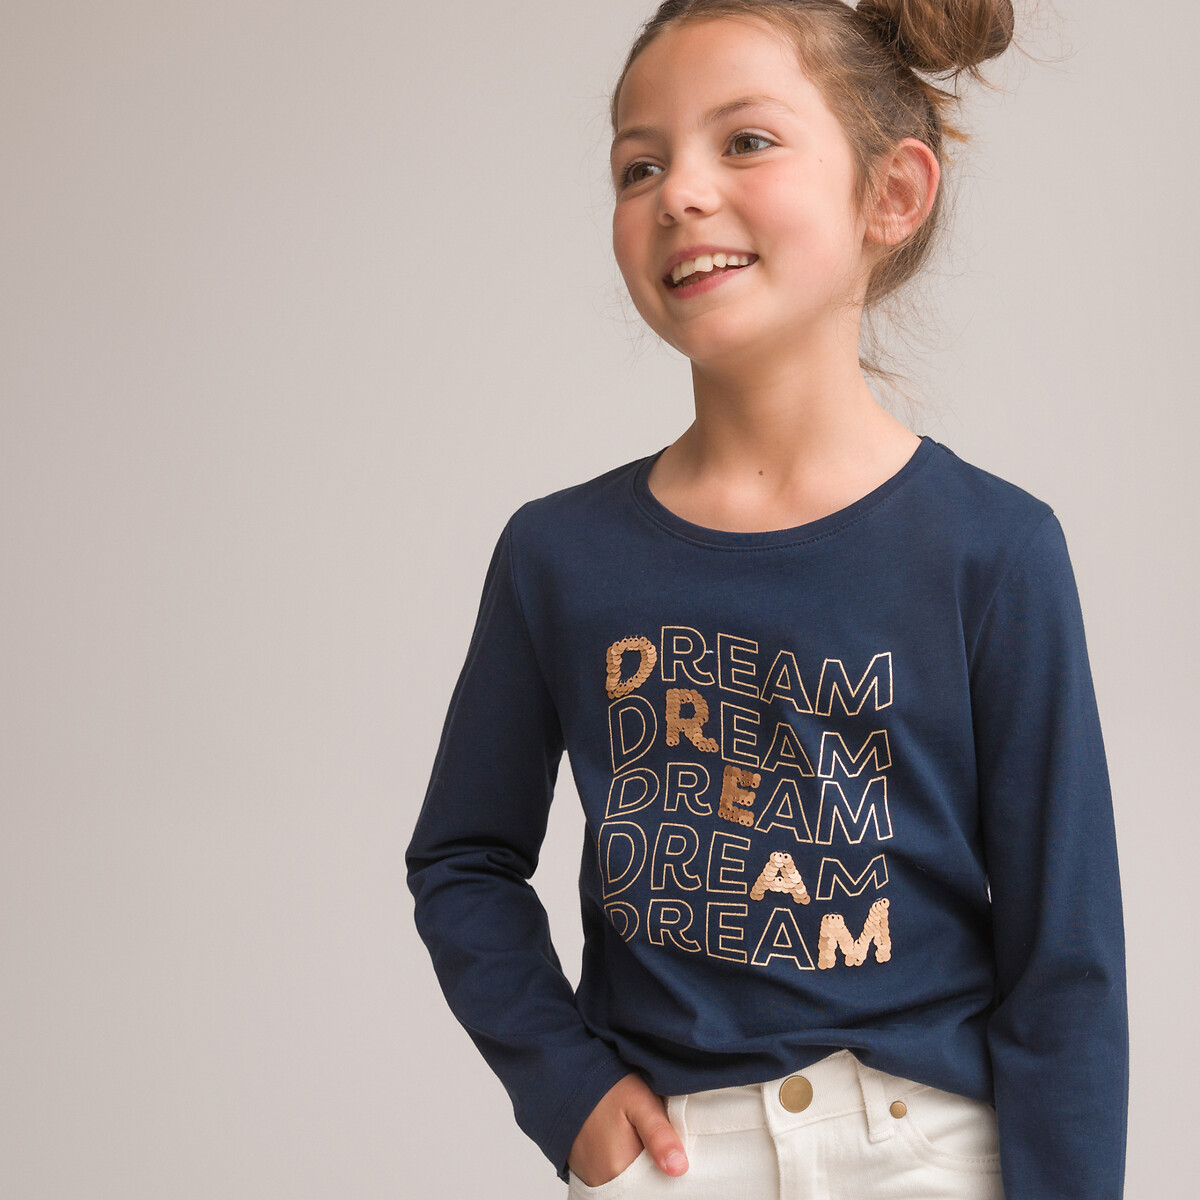 Glittery Dream Print T-Shirt in Cotton with Sequin Details